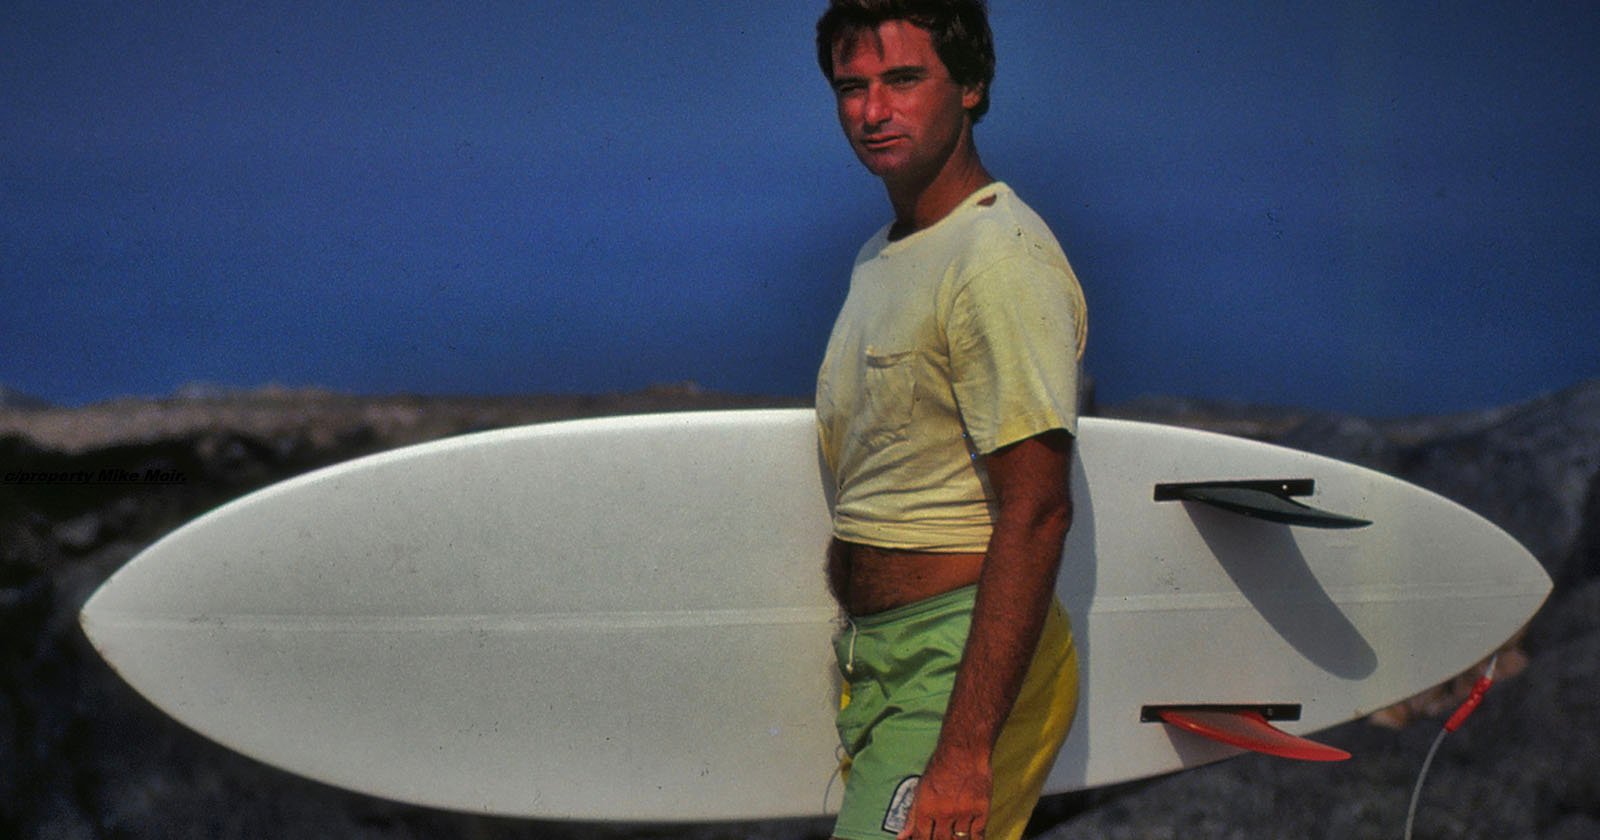  legendary photographer who captured 1980s surfing dies aged 